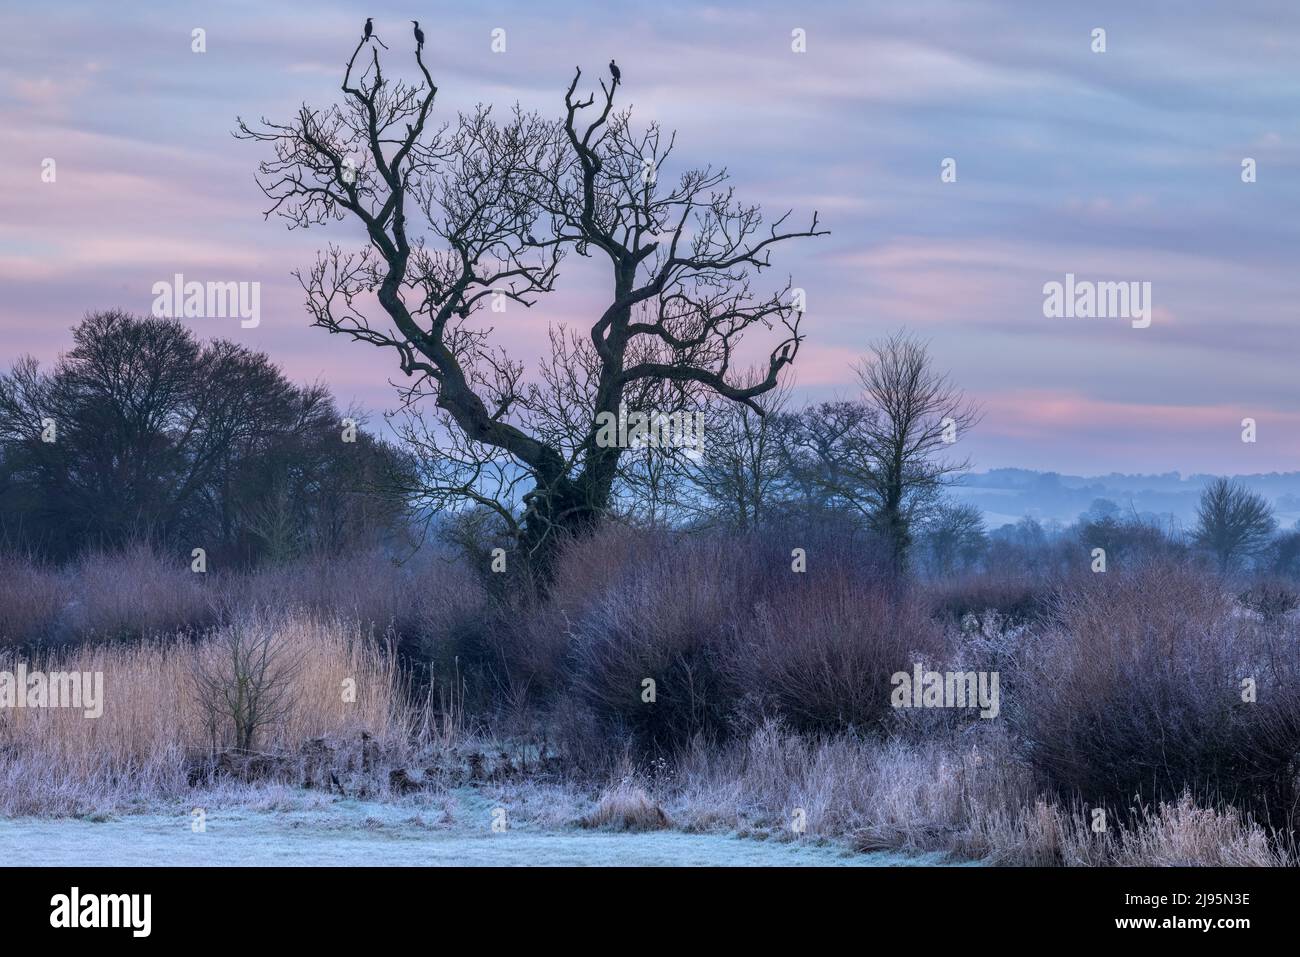 Three cormorants in a tree on a frosty morning on the banks of the River Stour at Fiddleford, Dorset, England, UK Stock Photo